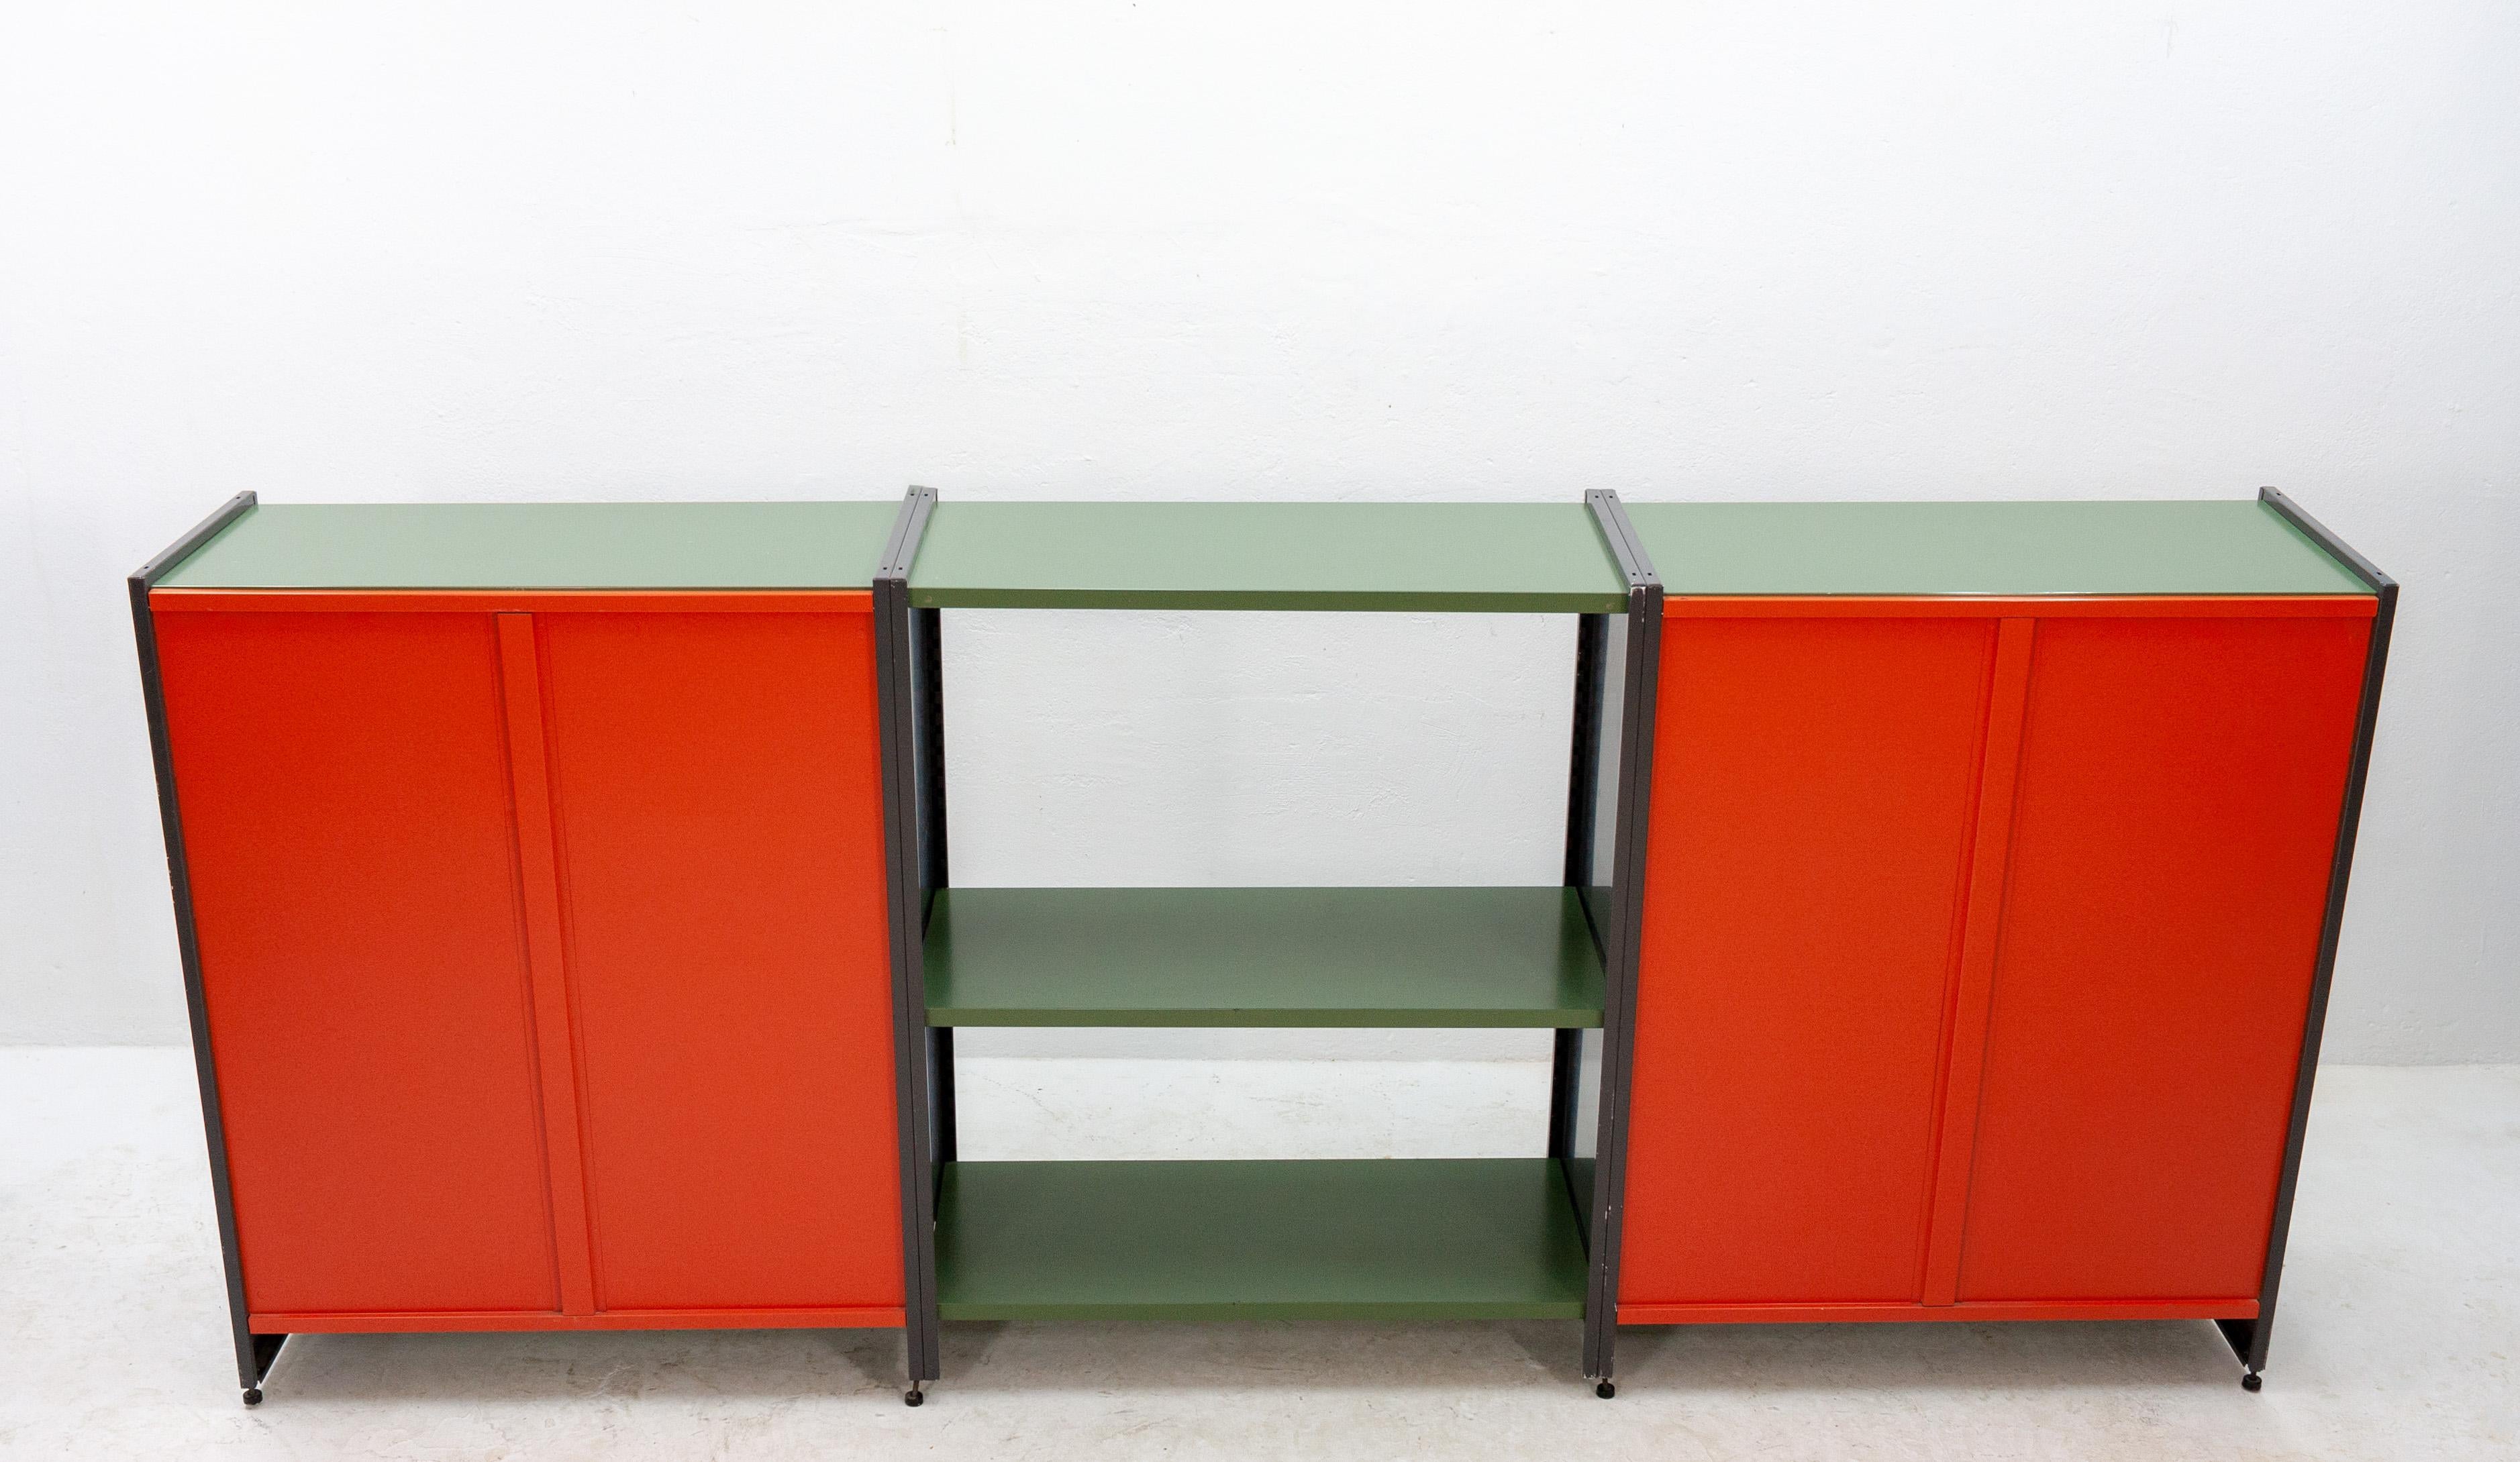 Modular all-metal cabinet system model 5600 designed by A.R. Cordemeijer for Gispen. Dutch .Finished in a funky avocado green and red orange for the shelves and back, with anthracite uprights. Quite user-friendly to disassemble and rearrange. Made